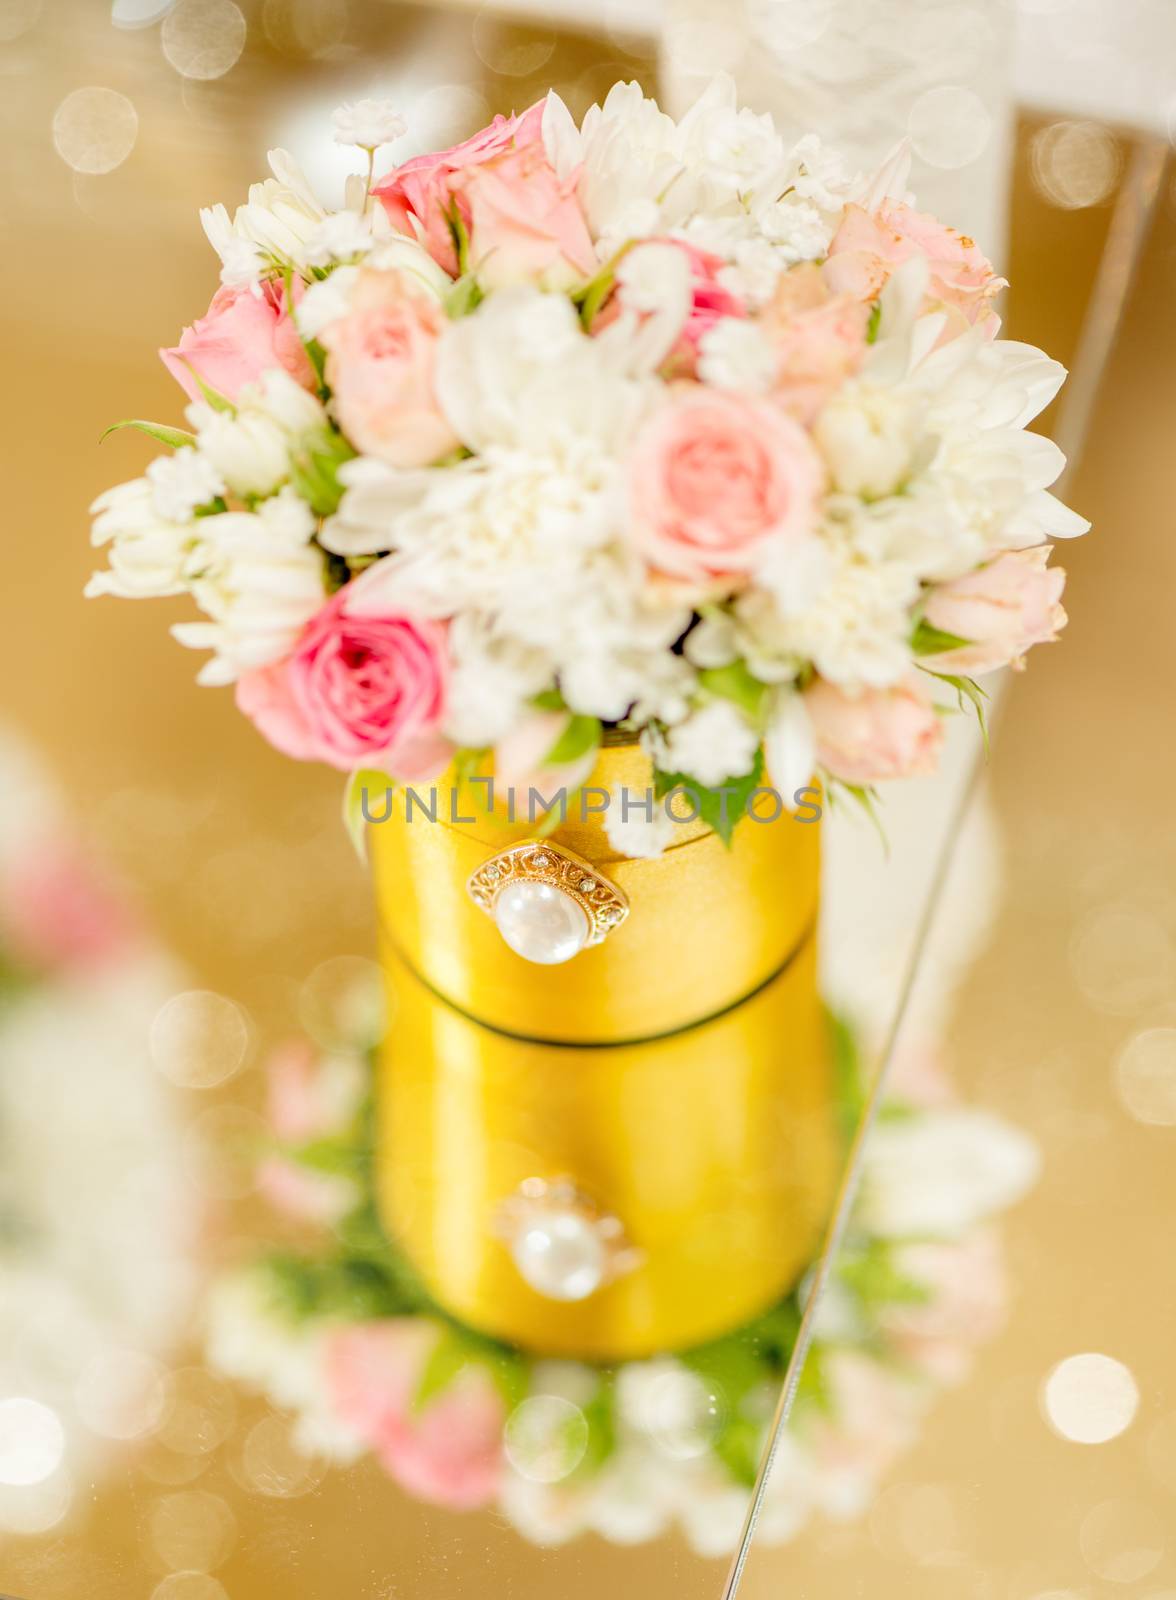 Close-up of a wedding table decoration with flowers